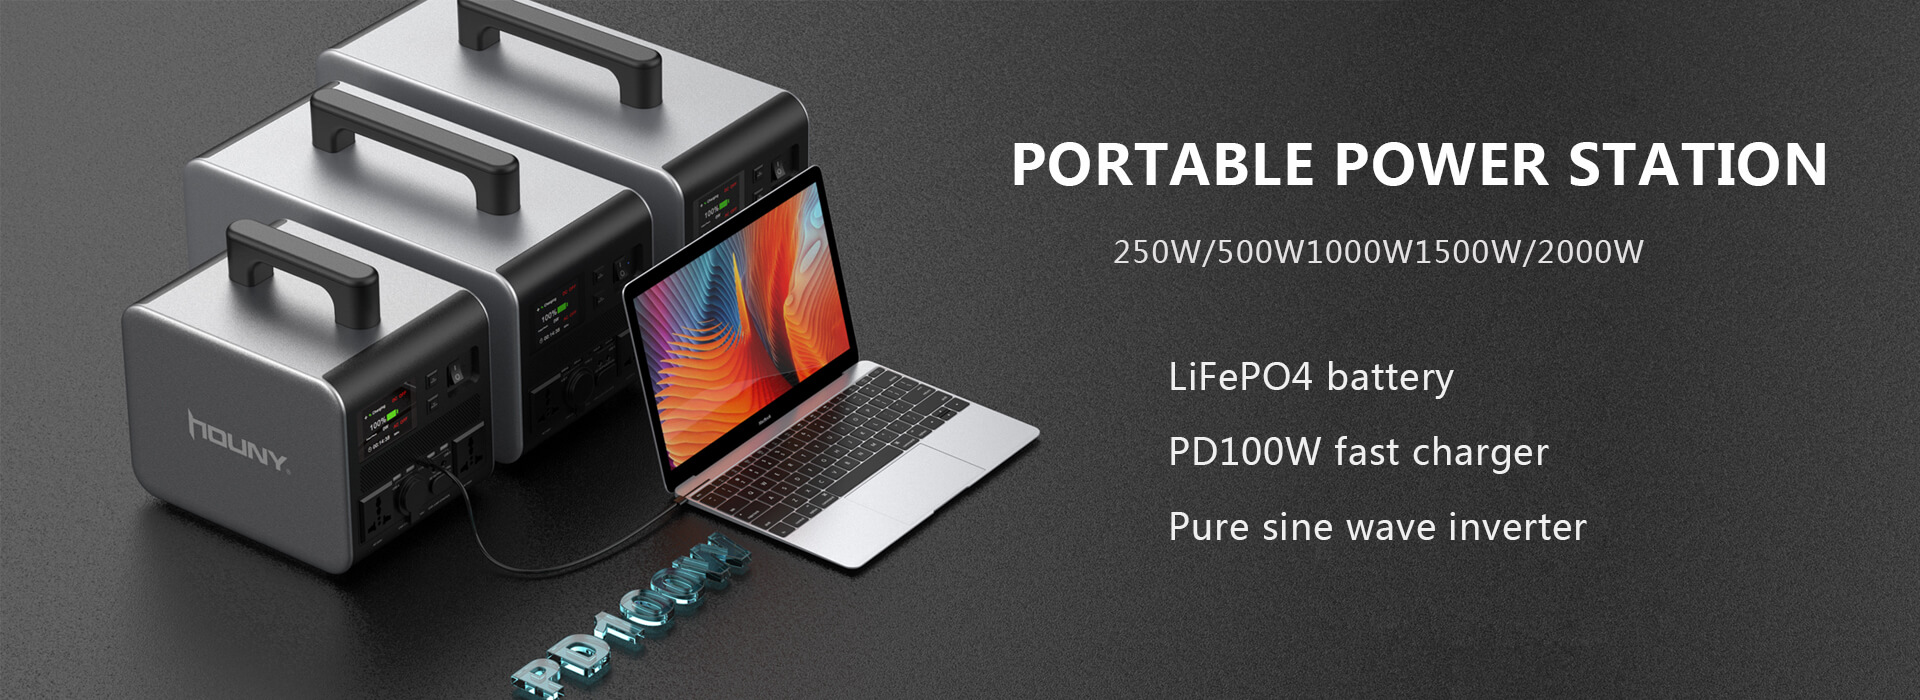 LiFePO4 portable power station 250W-2000W selectable,PD100W fast charging,pure sine wave inverter